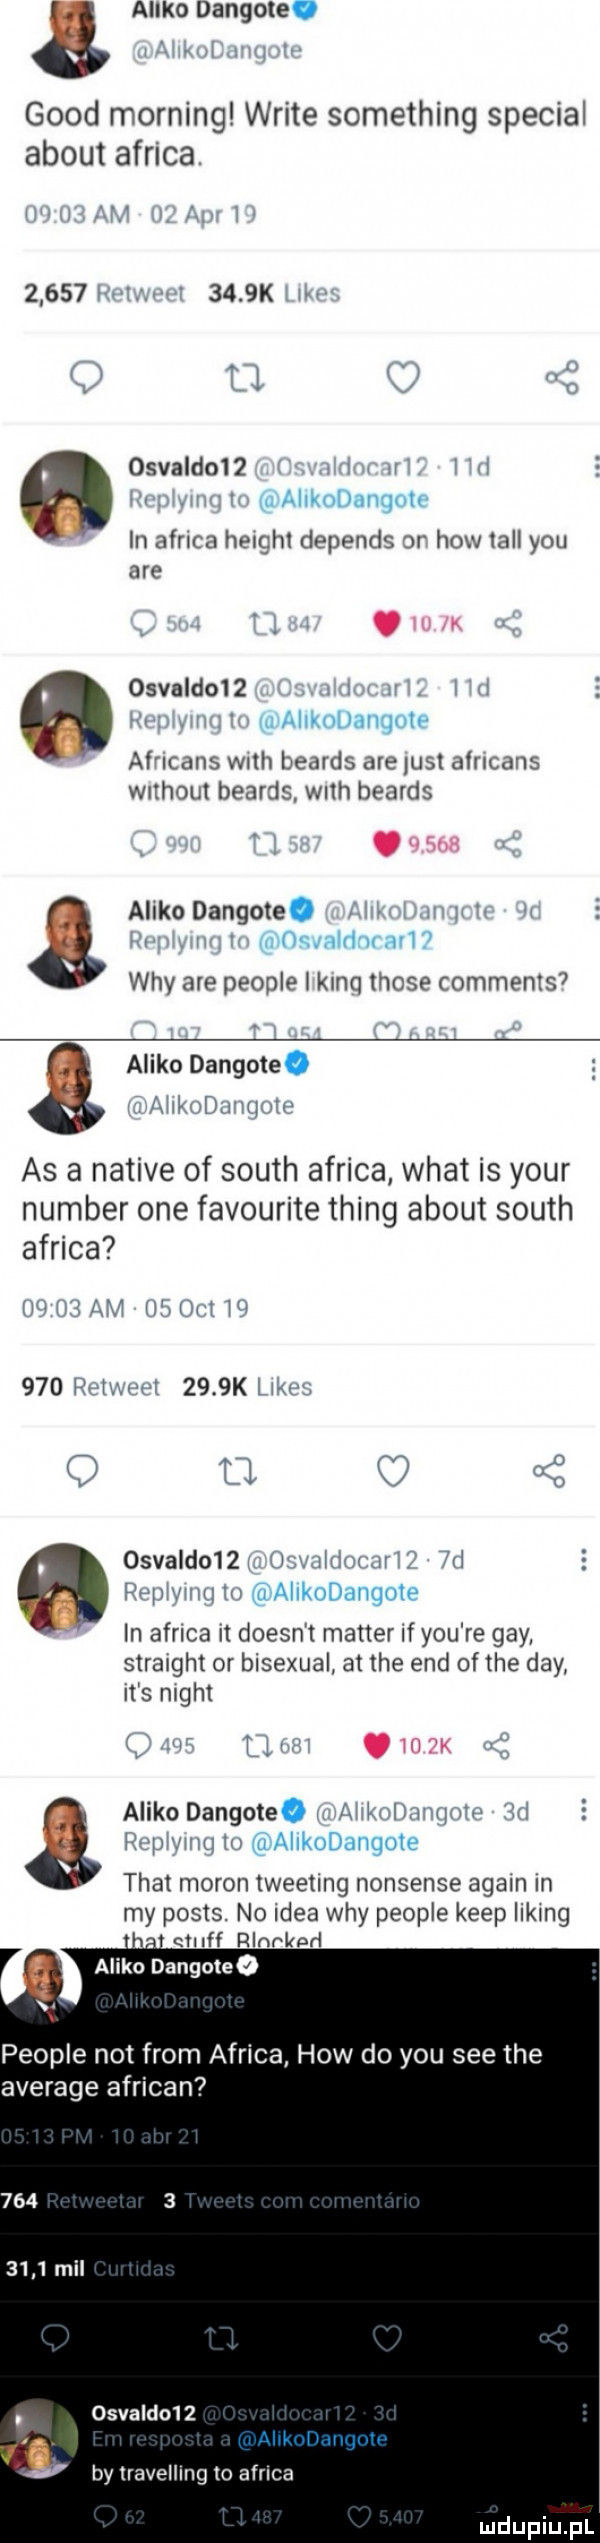 aniko dangote. geod morfing wbite something special abort africa           k l i osfald    i ii ilf kalk l dl j l in africa herriot depends di hiw tall y-u are osfald    i f ilikivliaiqiiis af irons with heads are iust aliicans wi hort bear is with beaids aniko dangote. ox iii ii ibl  wdy are people kinu those comments . aniko dangotee i i il ii iii i ii as a native of south africa wiat is your number one favourite thing abort south africa ll i am il i iii w     hi ti i iiit     k im n if straight or bisexual at tee end of tee dcy ihs night ll oswaldo   i i i il i ii i il l i iii iii ilii i i iaiikodangote in africa it doesnt master if y-u re gay aniko dangoteo i ibl iii ii ilii i i i iii ilialikodarigote trat maron tweeting nonsense alain in my posts. no idea wdy people kiep lising h. riff rlnrknd aniko dangoteo people not from africa hiw do y-u sie tee average african oswaldo   t bytravellingto africa